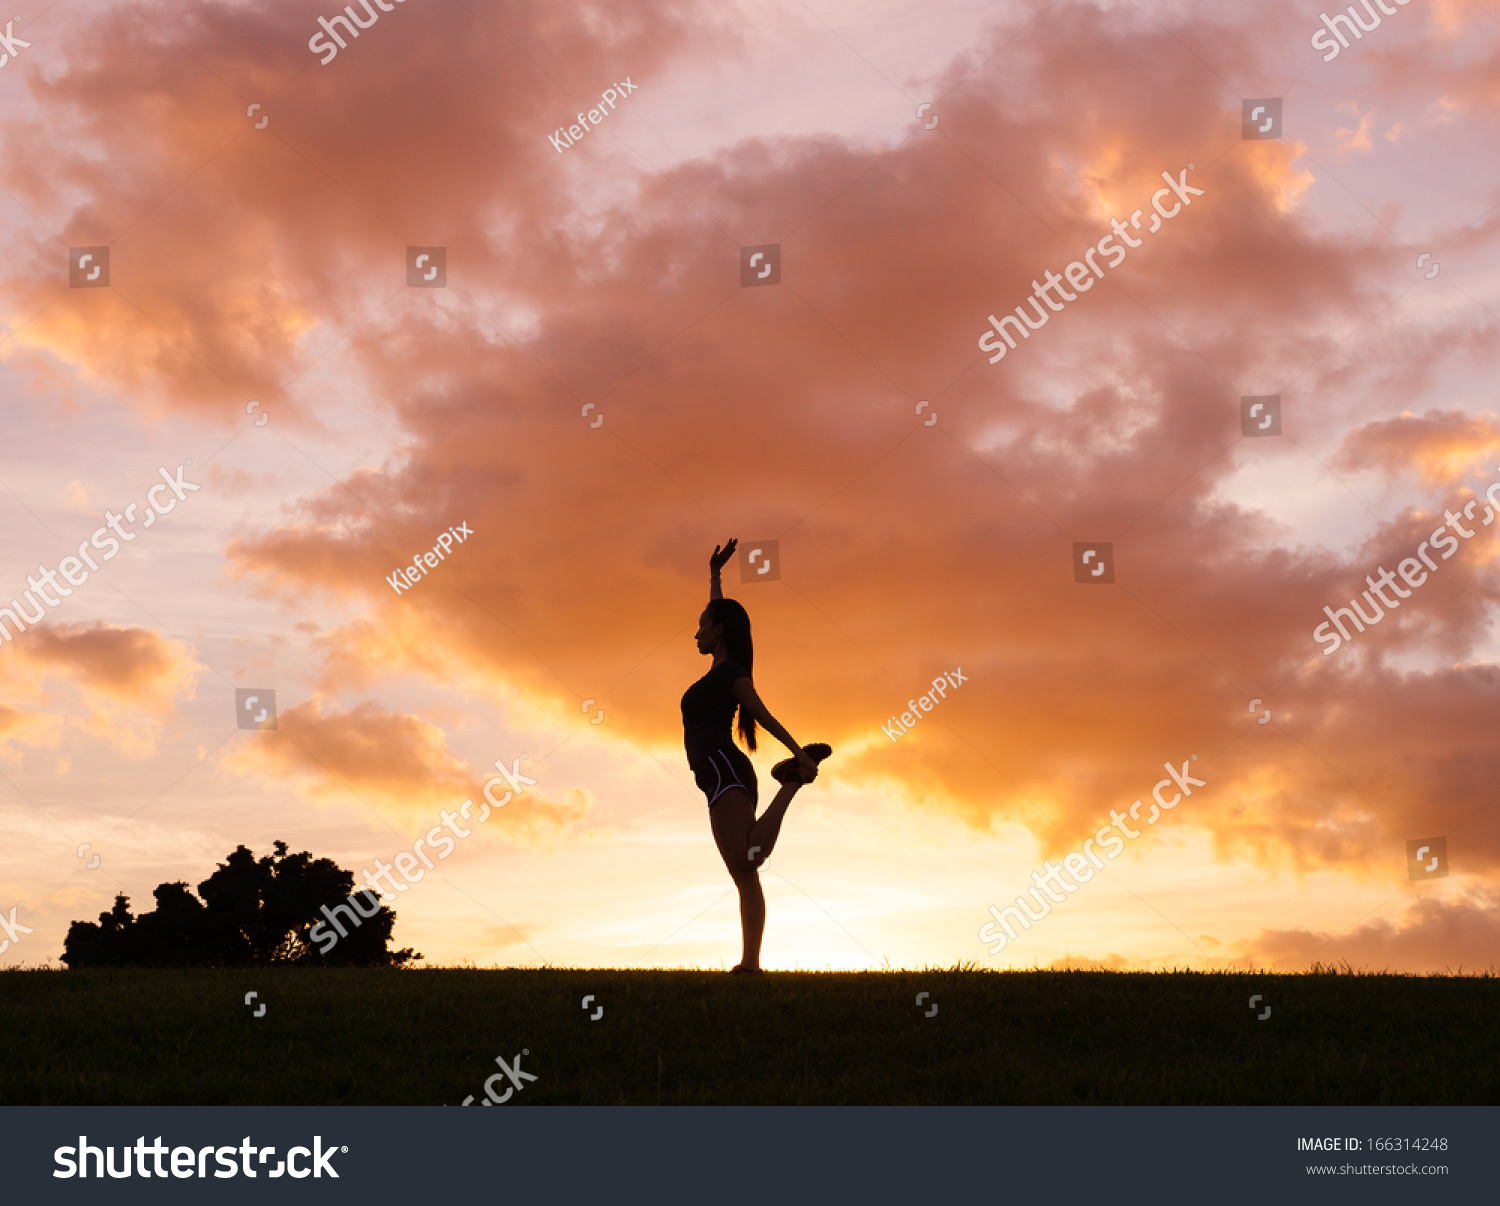 Silhouette of young woman practicing yoga outdoors at sunset #166314248